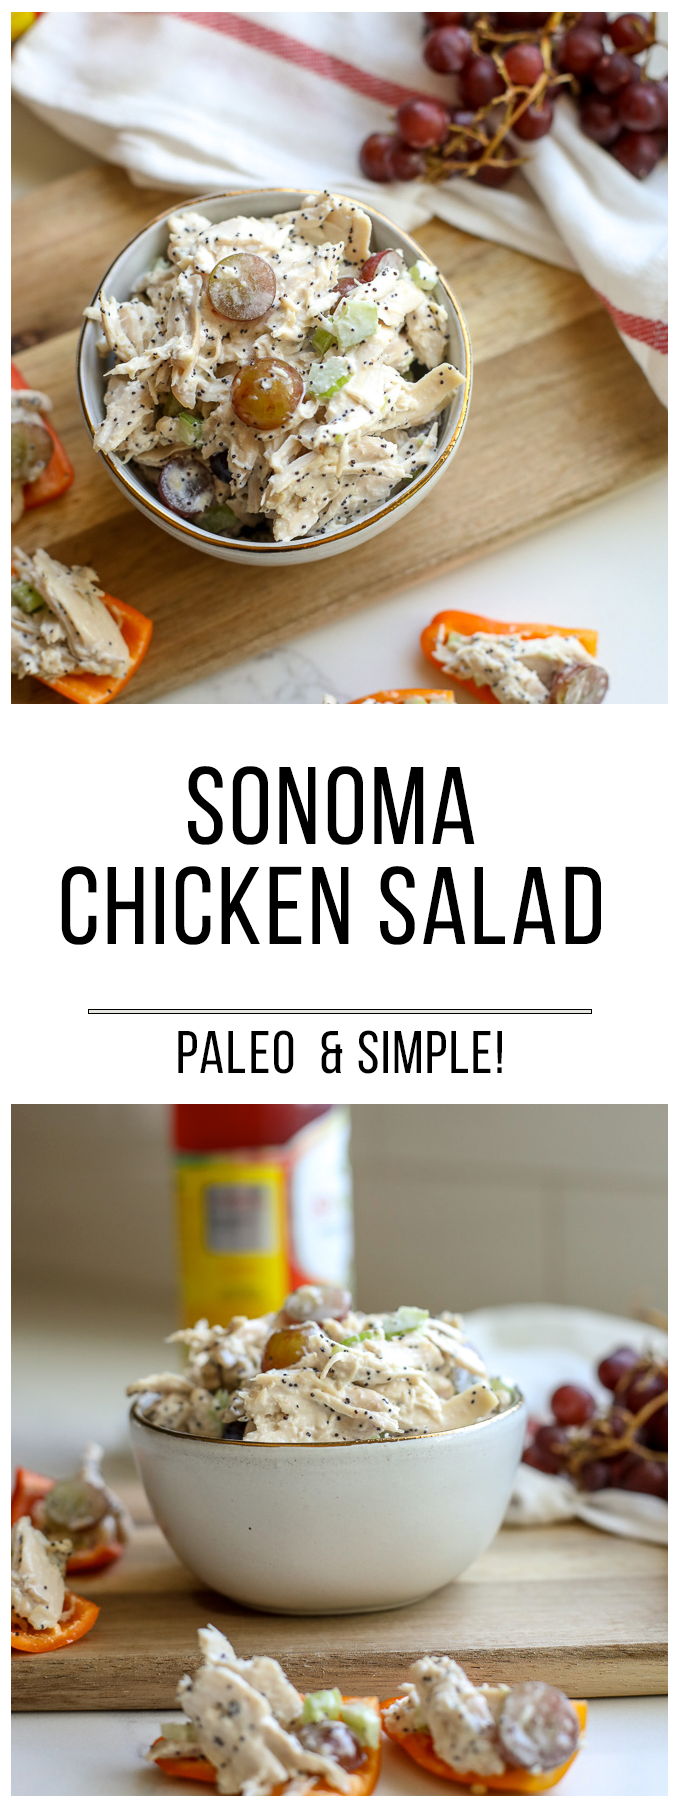 This Sonoma Chicken Salad is a favorite to people of any age or diet! Paleo and perfect for a quick lunch you can prep ahead of time!